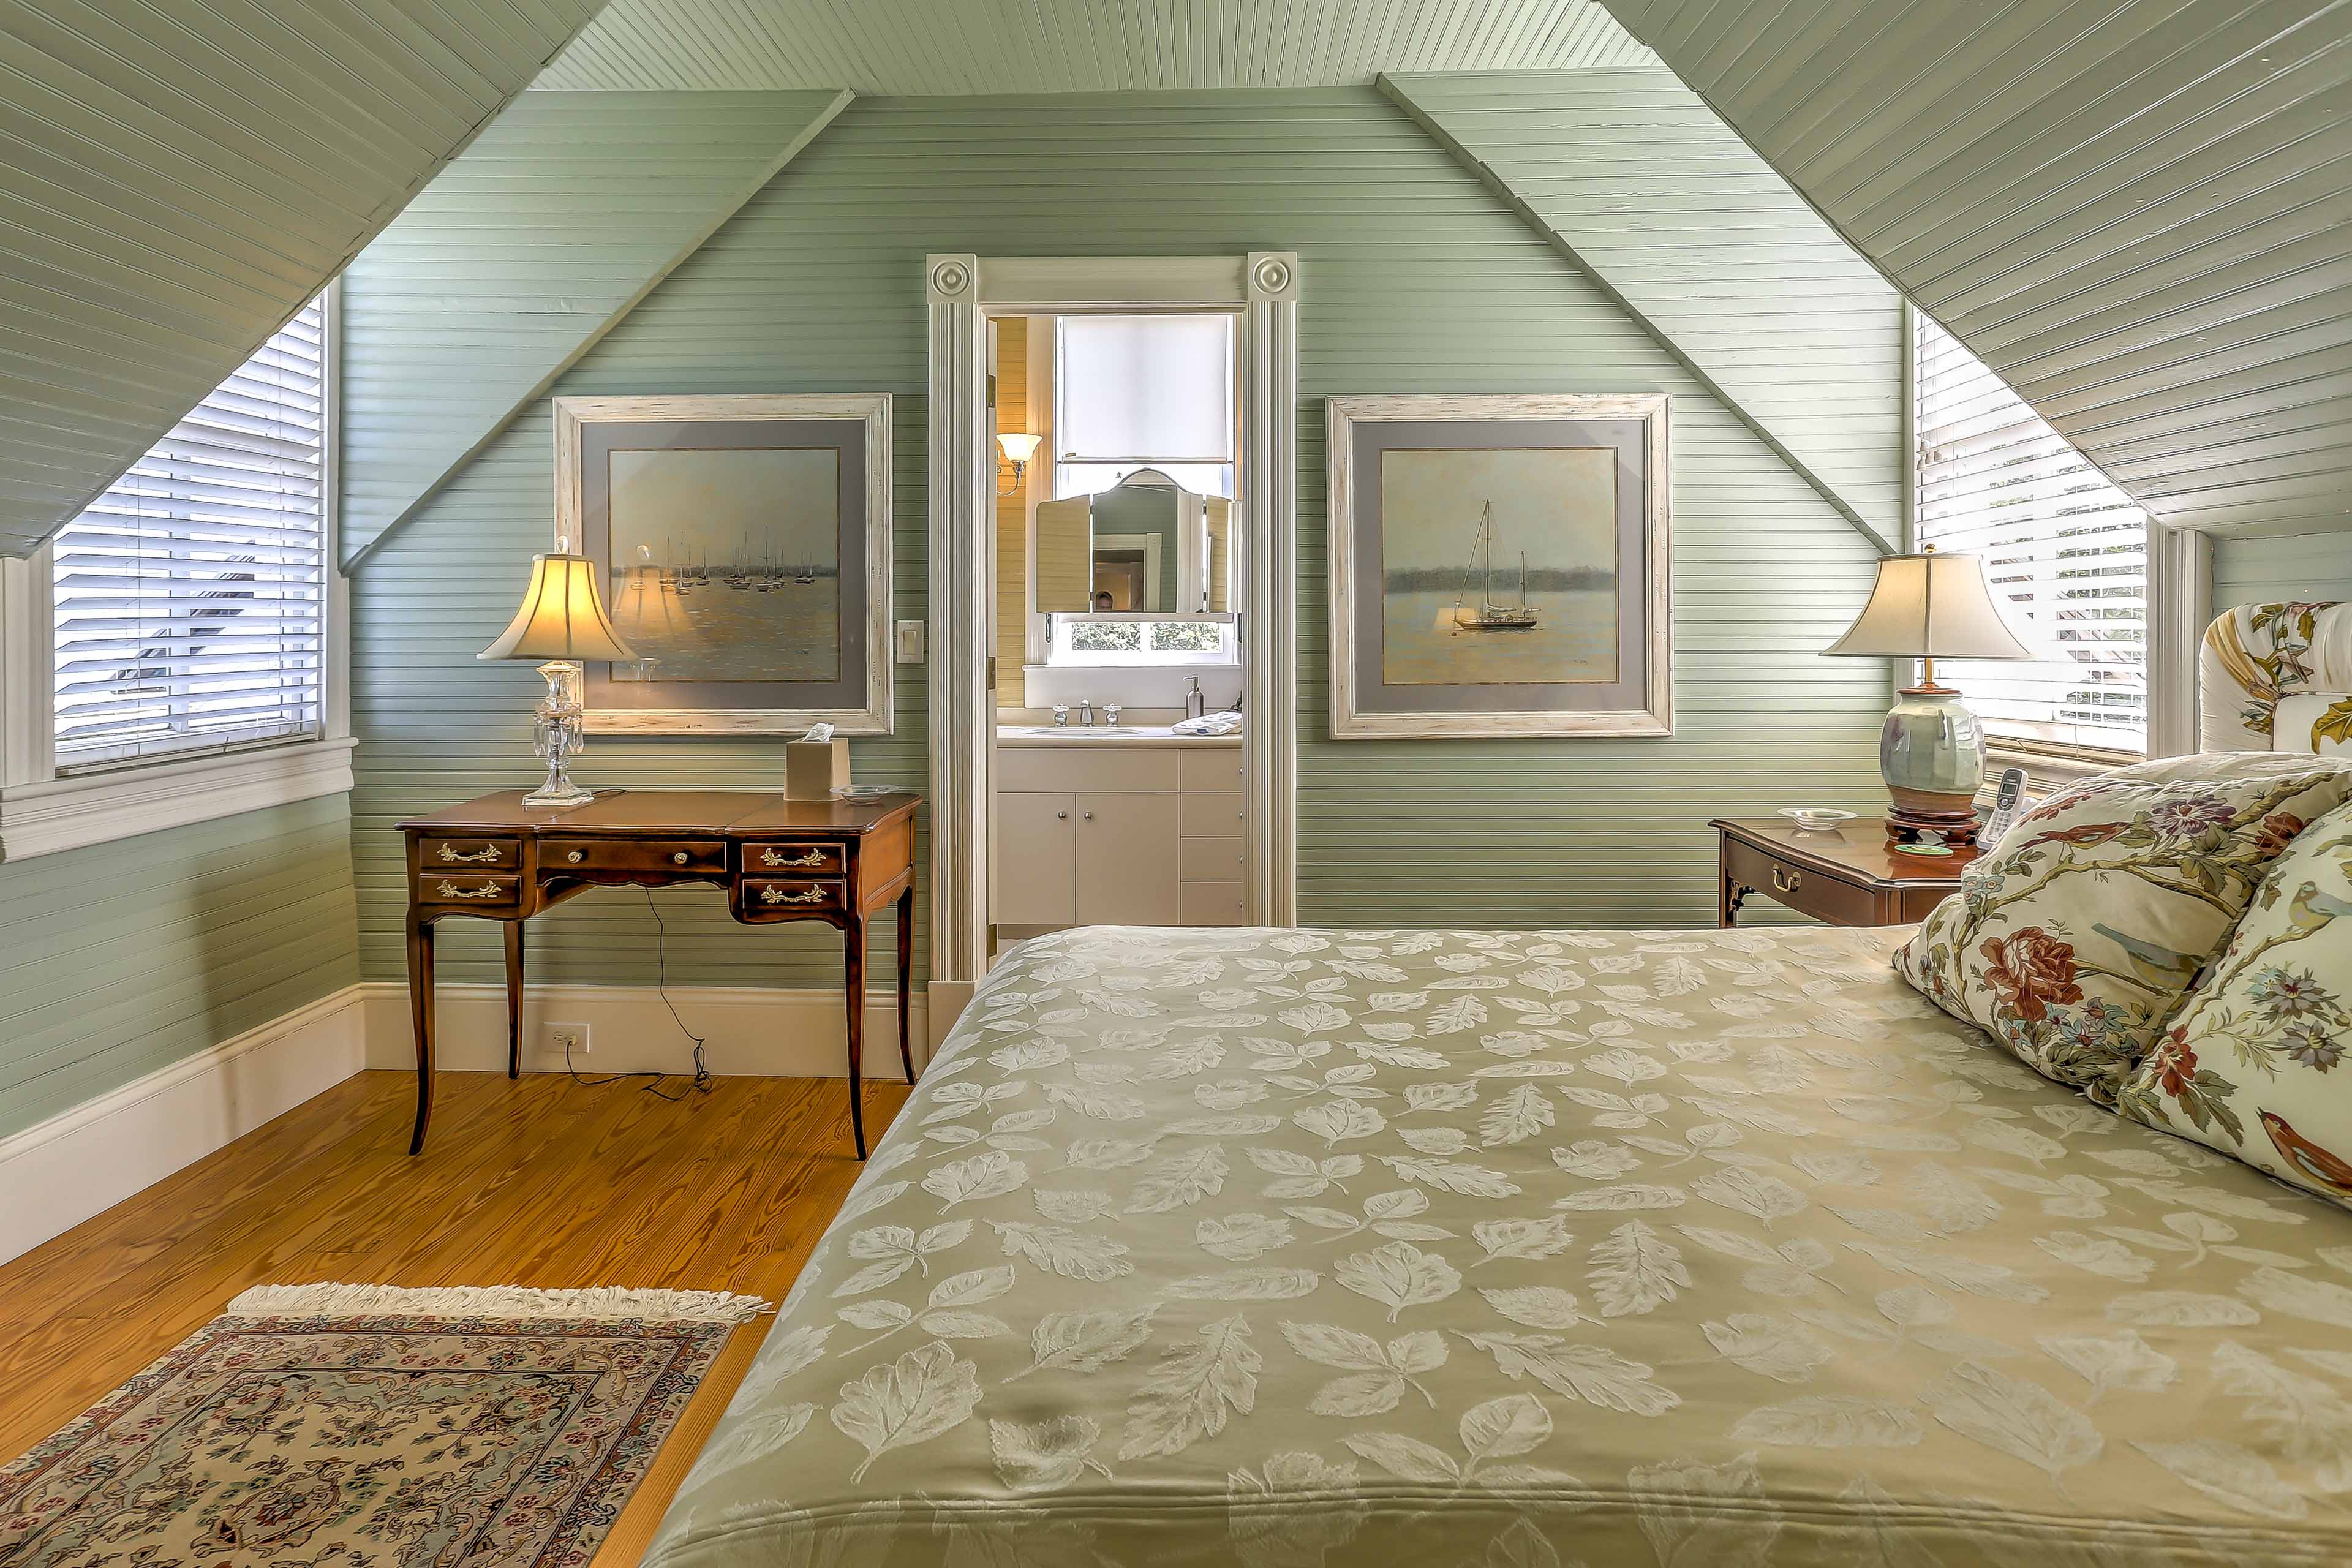 Curl up in this queen-sized bed for a full night's rest.